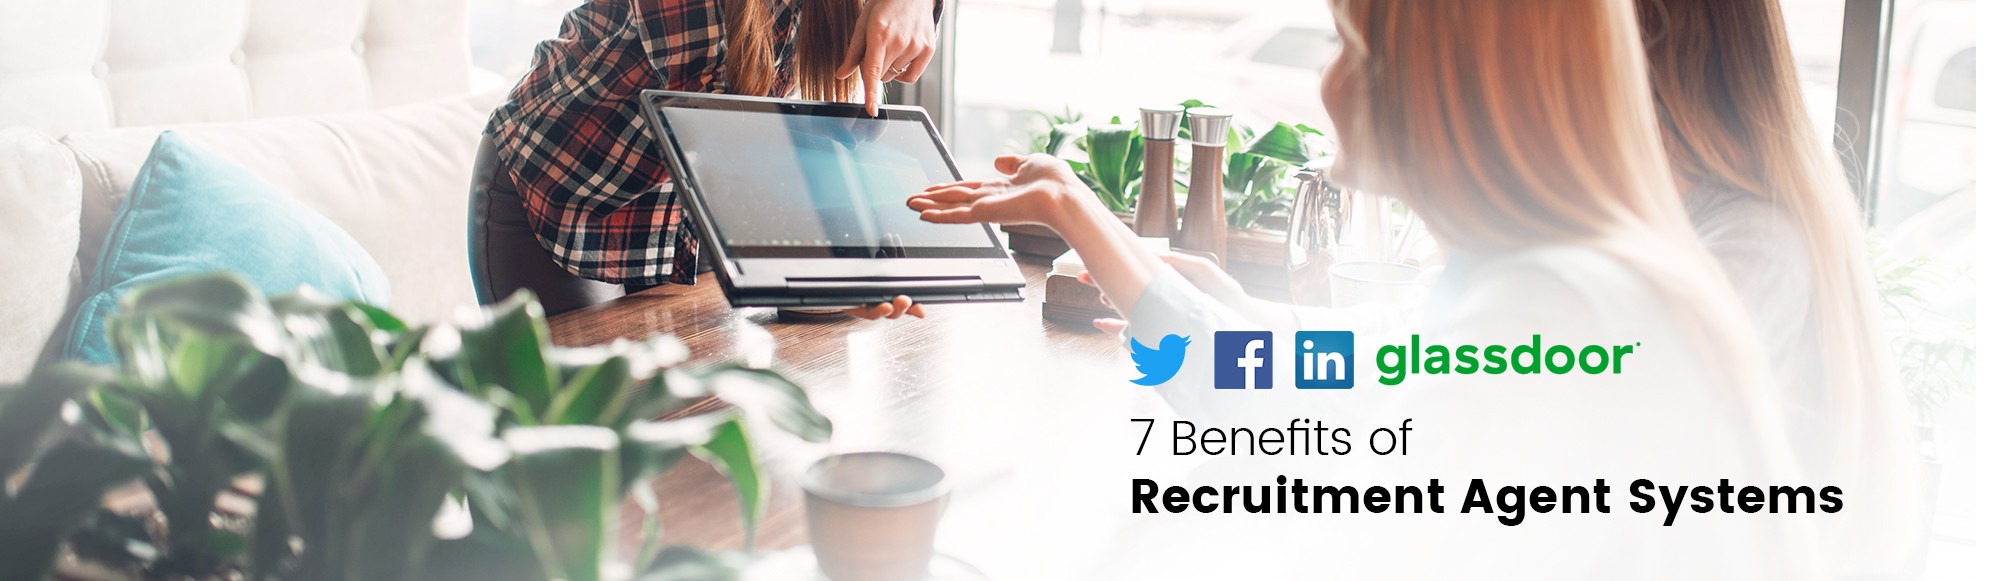 7 benefits of recruitment agent systems